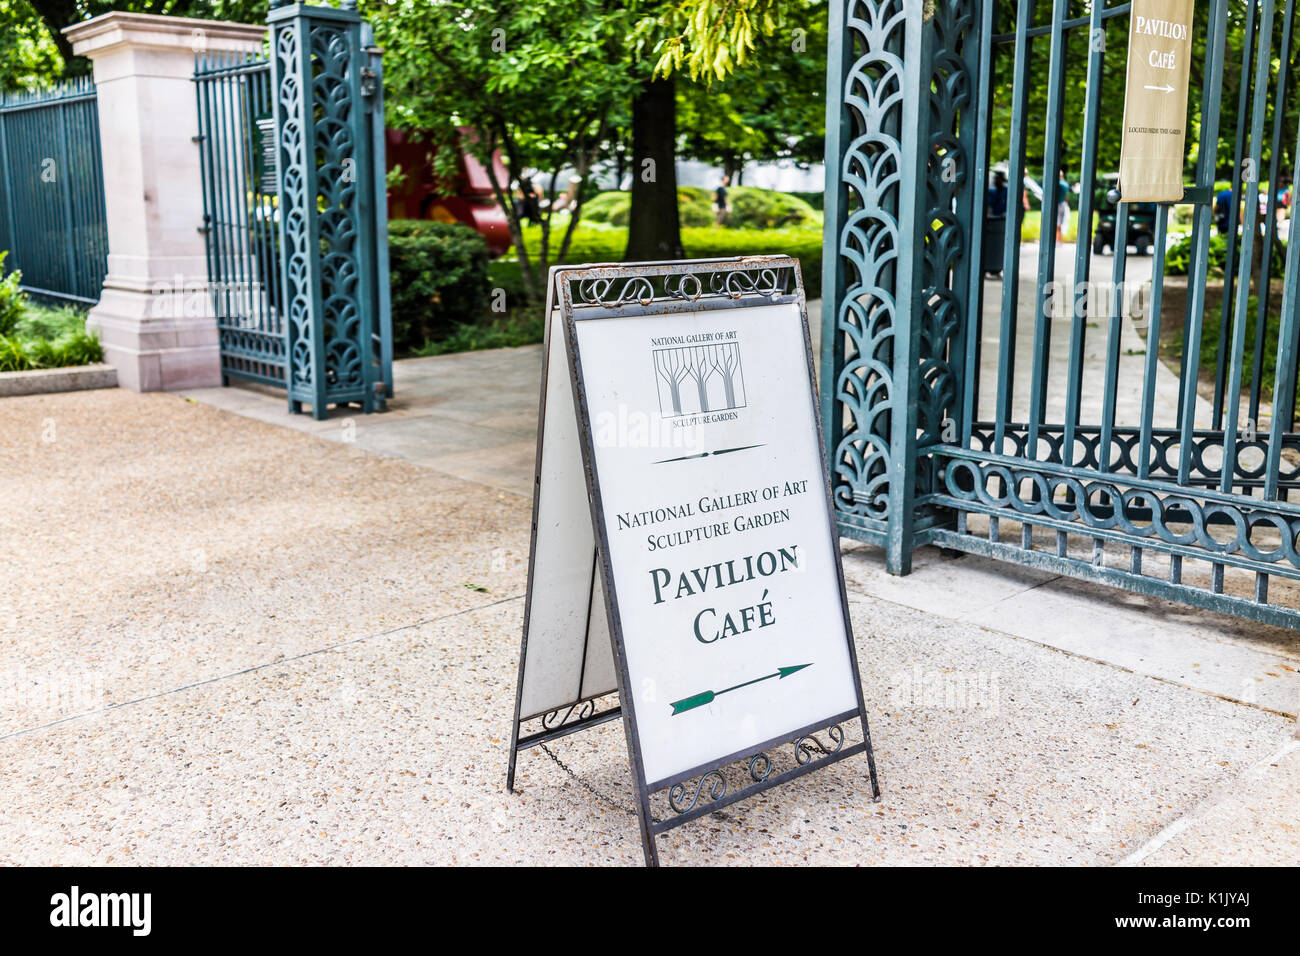 Washington DC, USA - July 3, 2017: Closeup of sign for Pavilion Cafe and National Gallery of Art Sculpture Garden in summer on National Mall Stock Photo